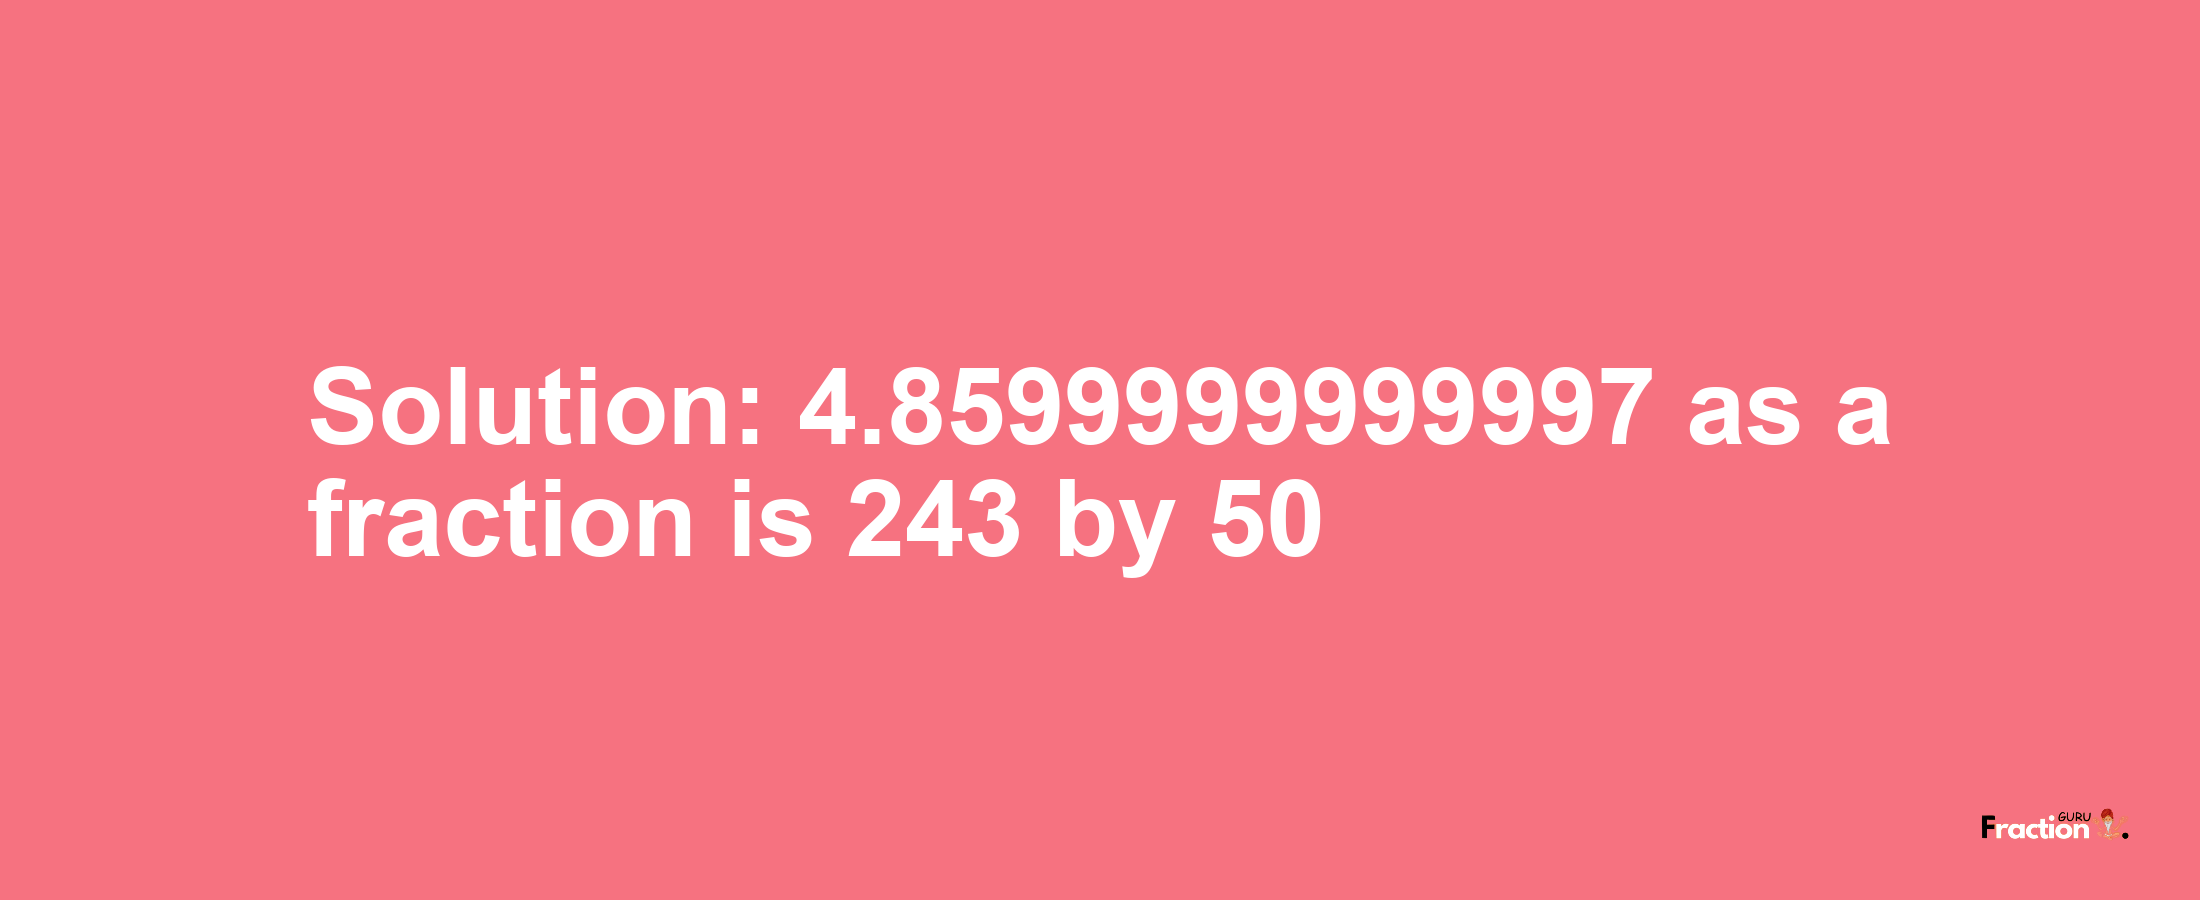 Solution:4.8599999999997 as a fraction is 243/50